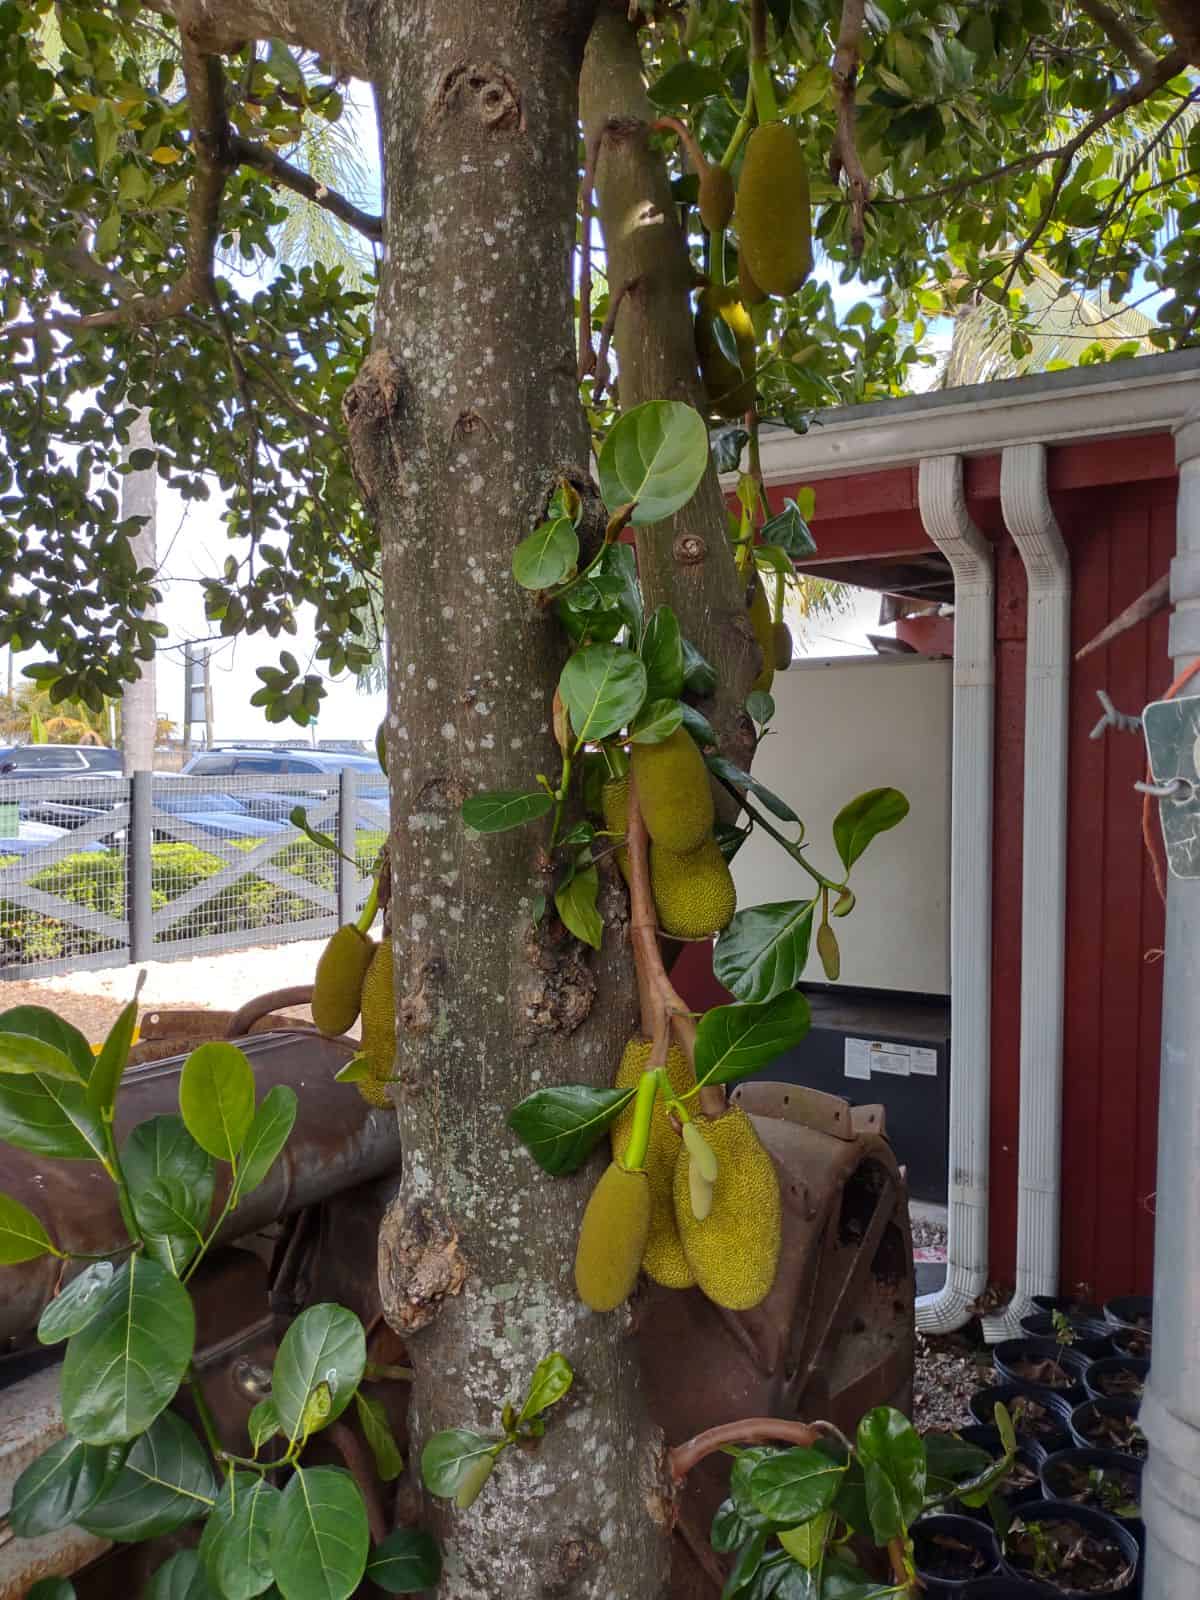 A jackfruit tree with small fruit that is beginning to grow and get bigger.